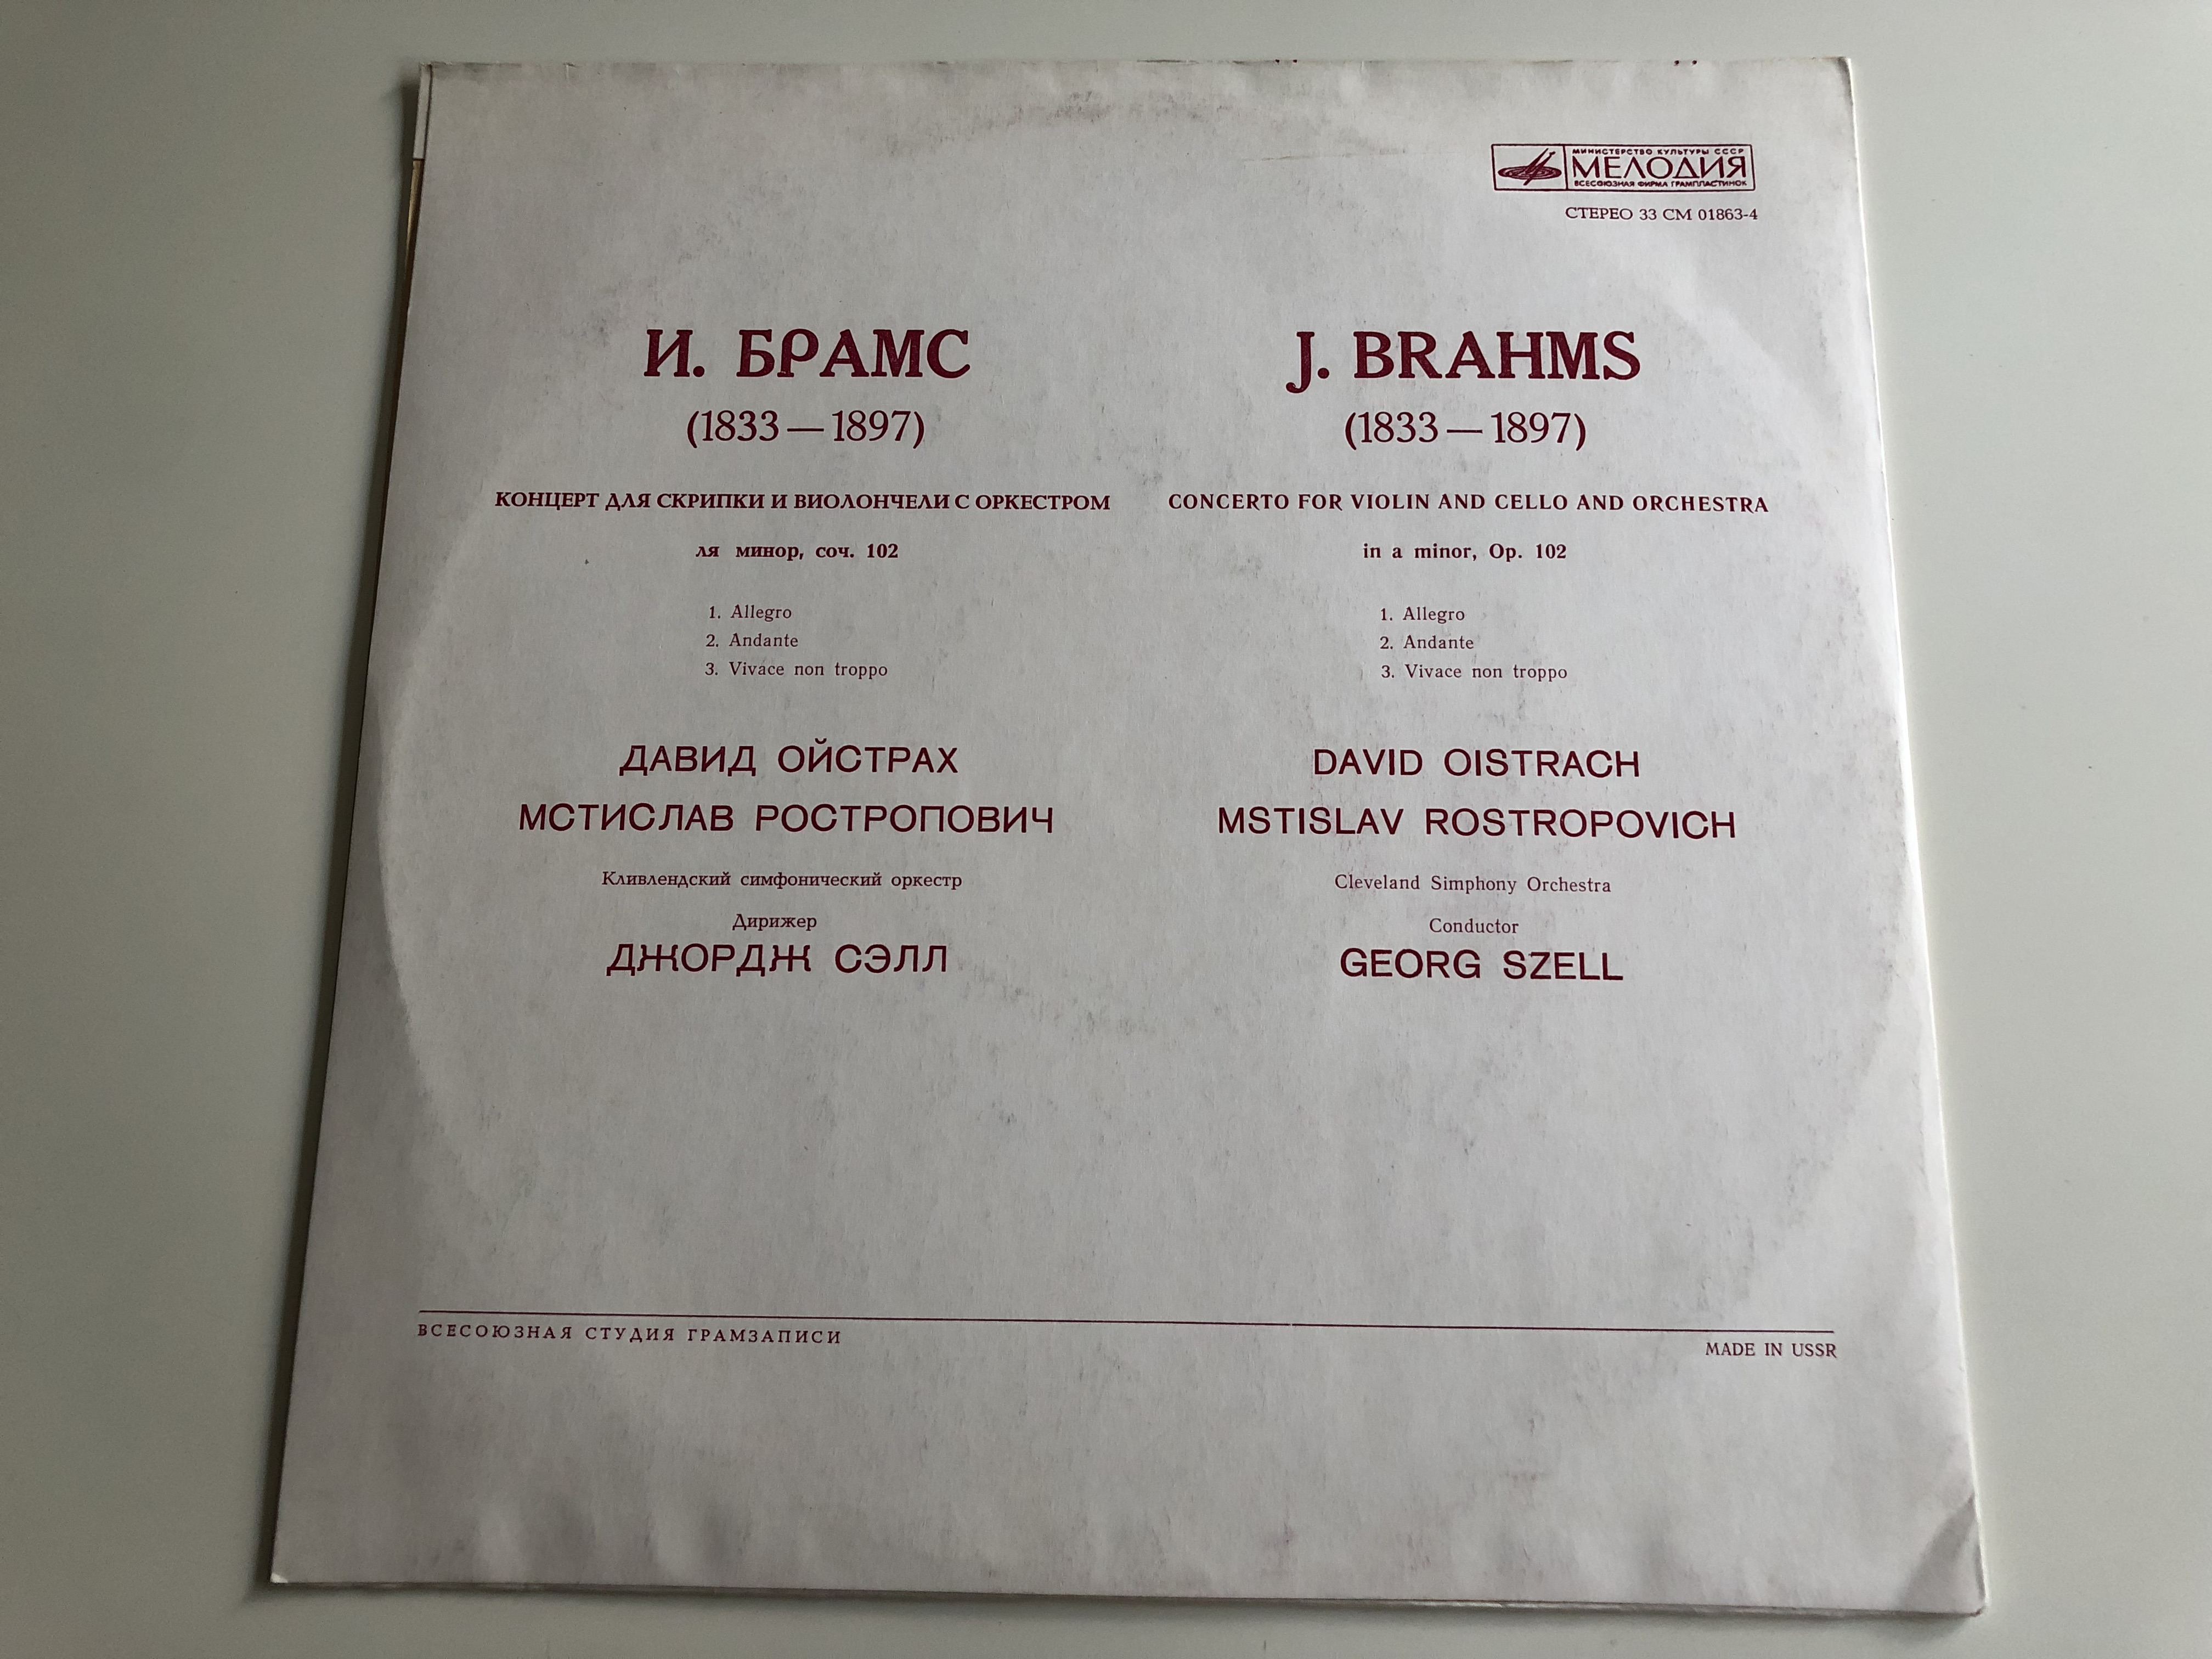 j.-brahms-concerto-for-violin-and-cello-and-orchestra-in-a-minor-op.-102-david-oistrakh-mstislav-rostropovich-cleveland-symphony-orchestra-george-szell-conductor-cm01863-4-2-.jpg